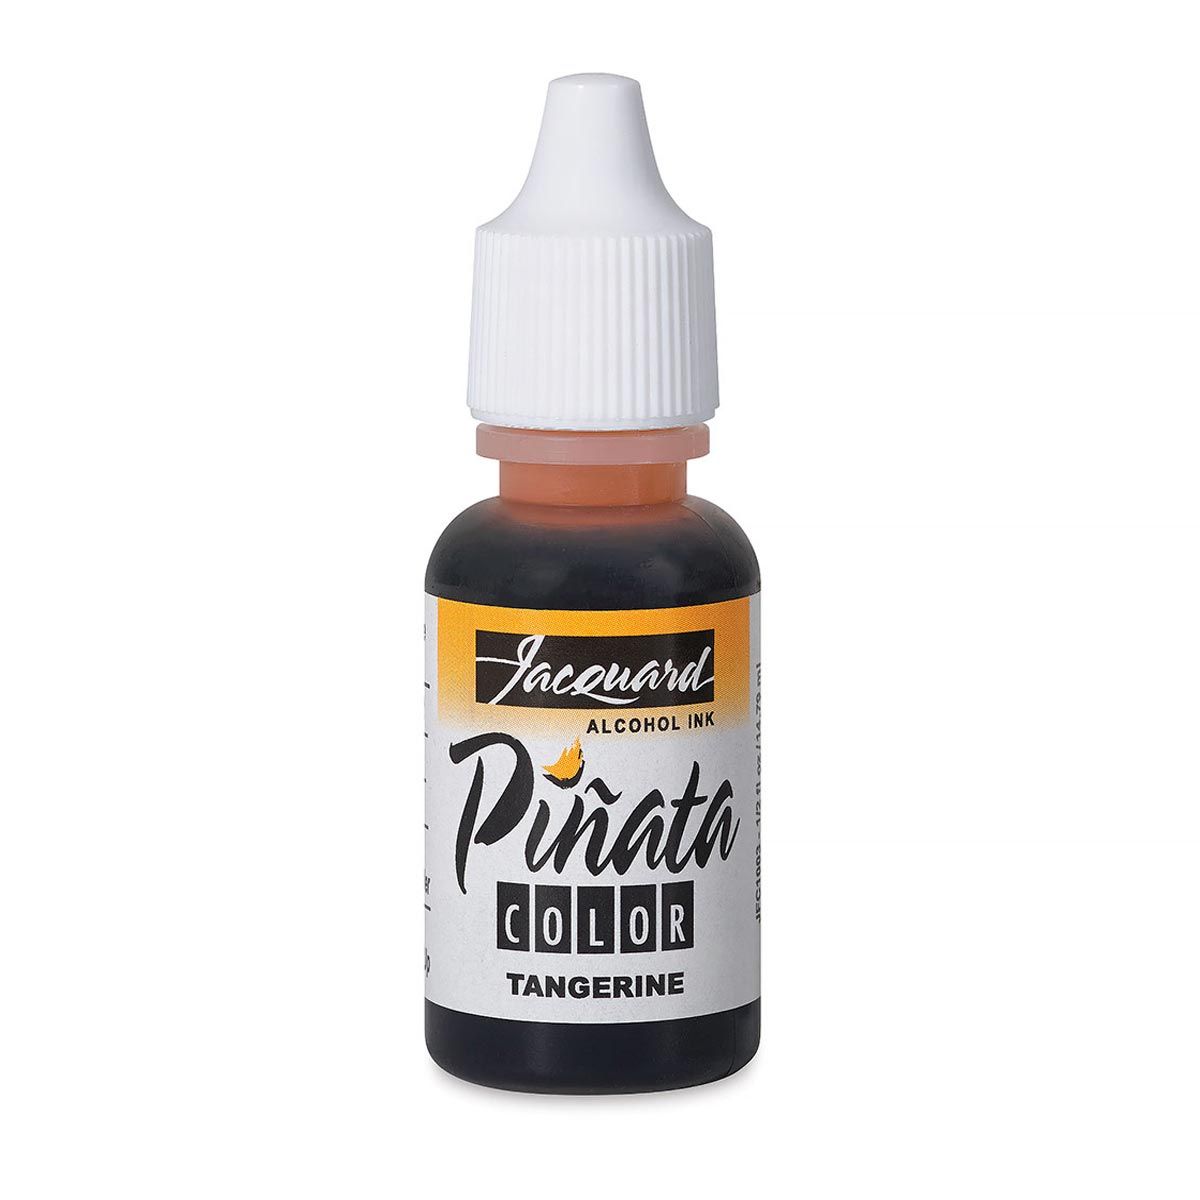 Pinata Color Alcohol Ink - Tangerine 0.5-ounce